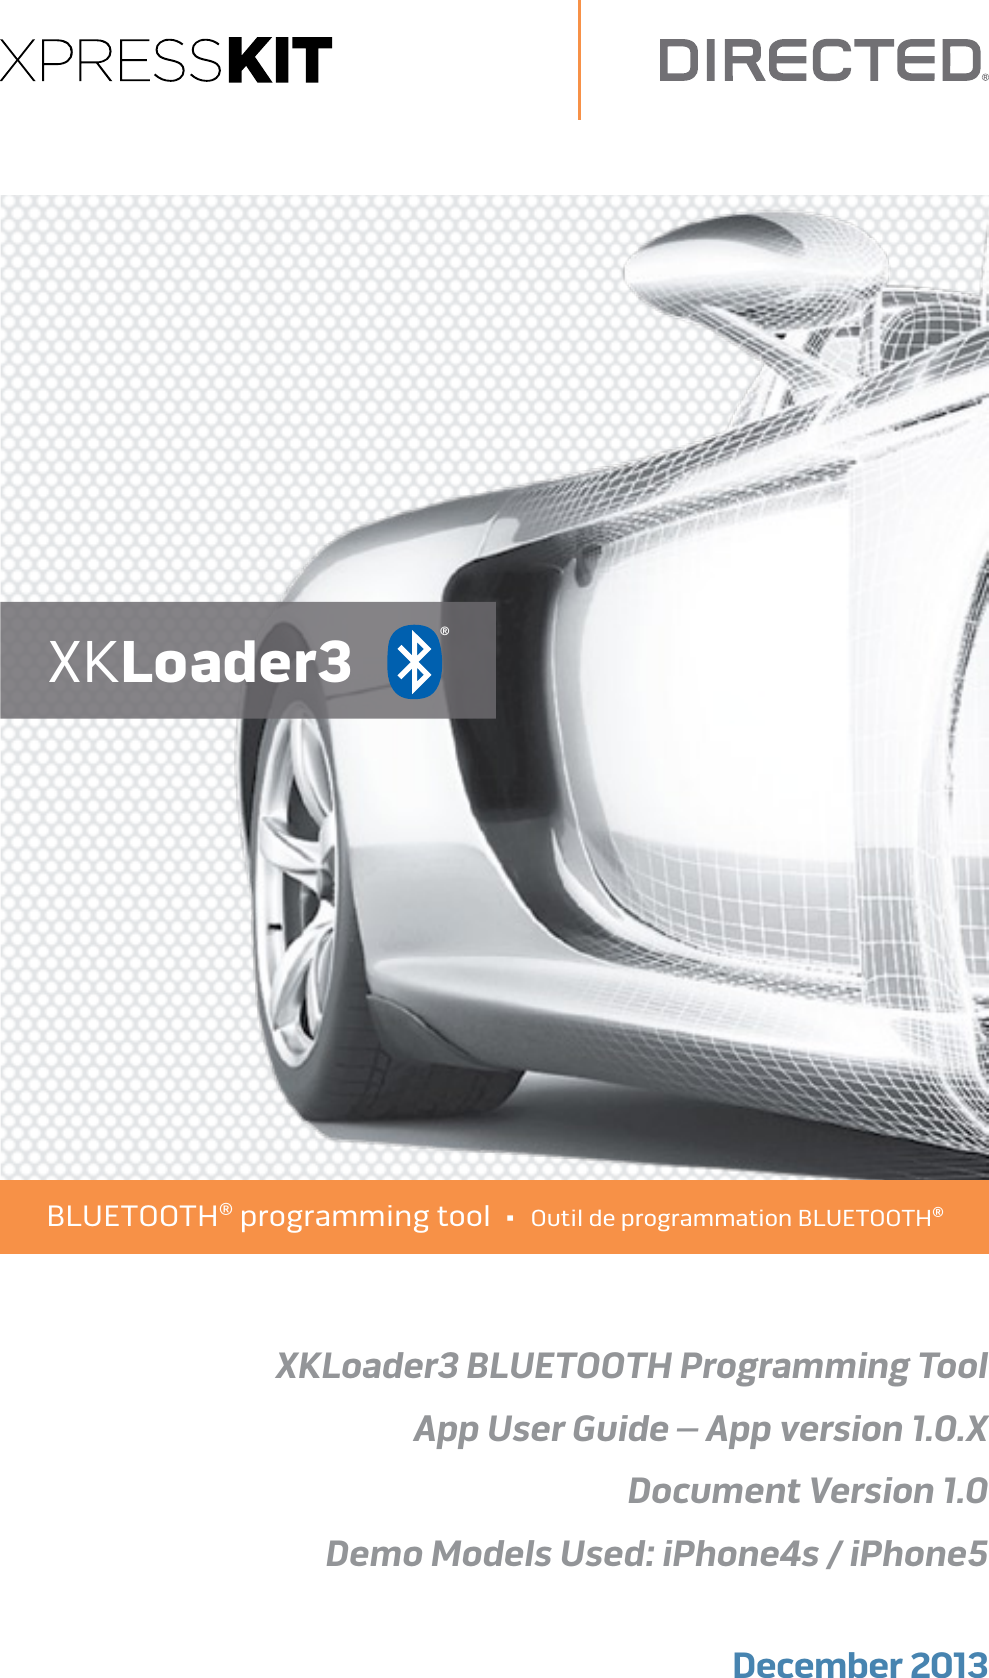 XKLoader3     ®        BLUETOOTH® programming tool  •  Outil de programmation BLUETOOTH®XKLoader3 BLUETOOTH Programming ToolApp User Guide – App version 1.0.XDocument Version 1.0Demo Models Used: iPhone4s / iPhone5 December 2013